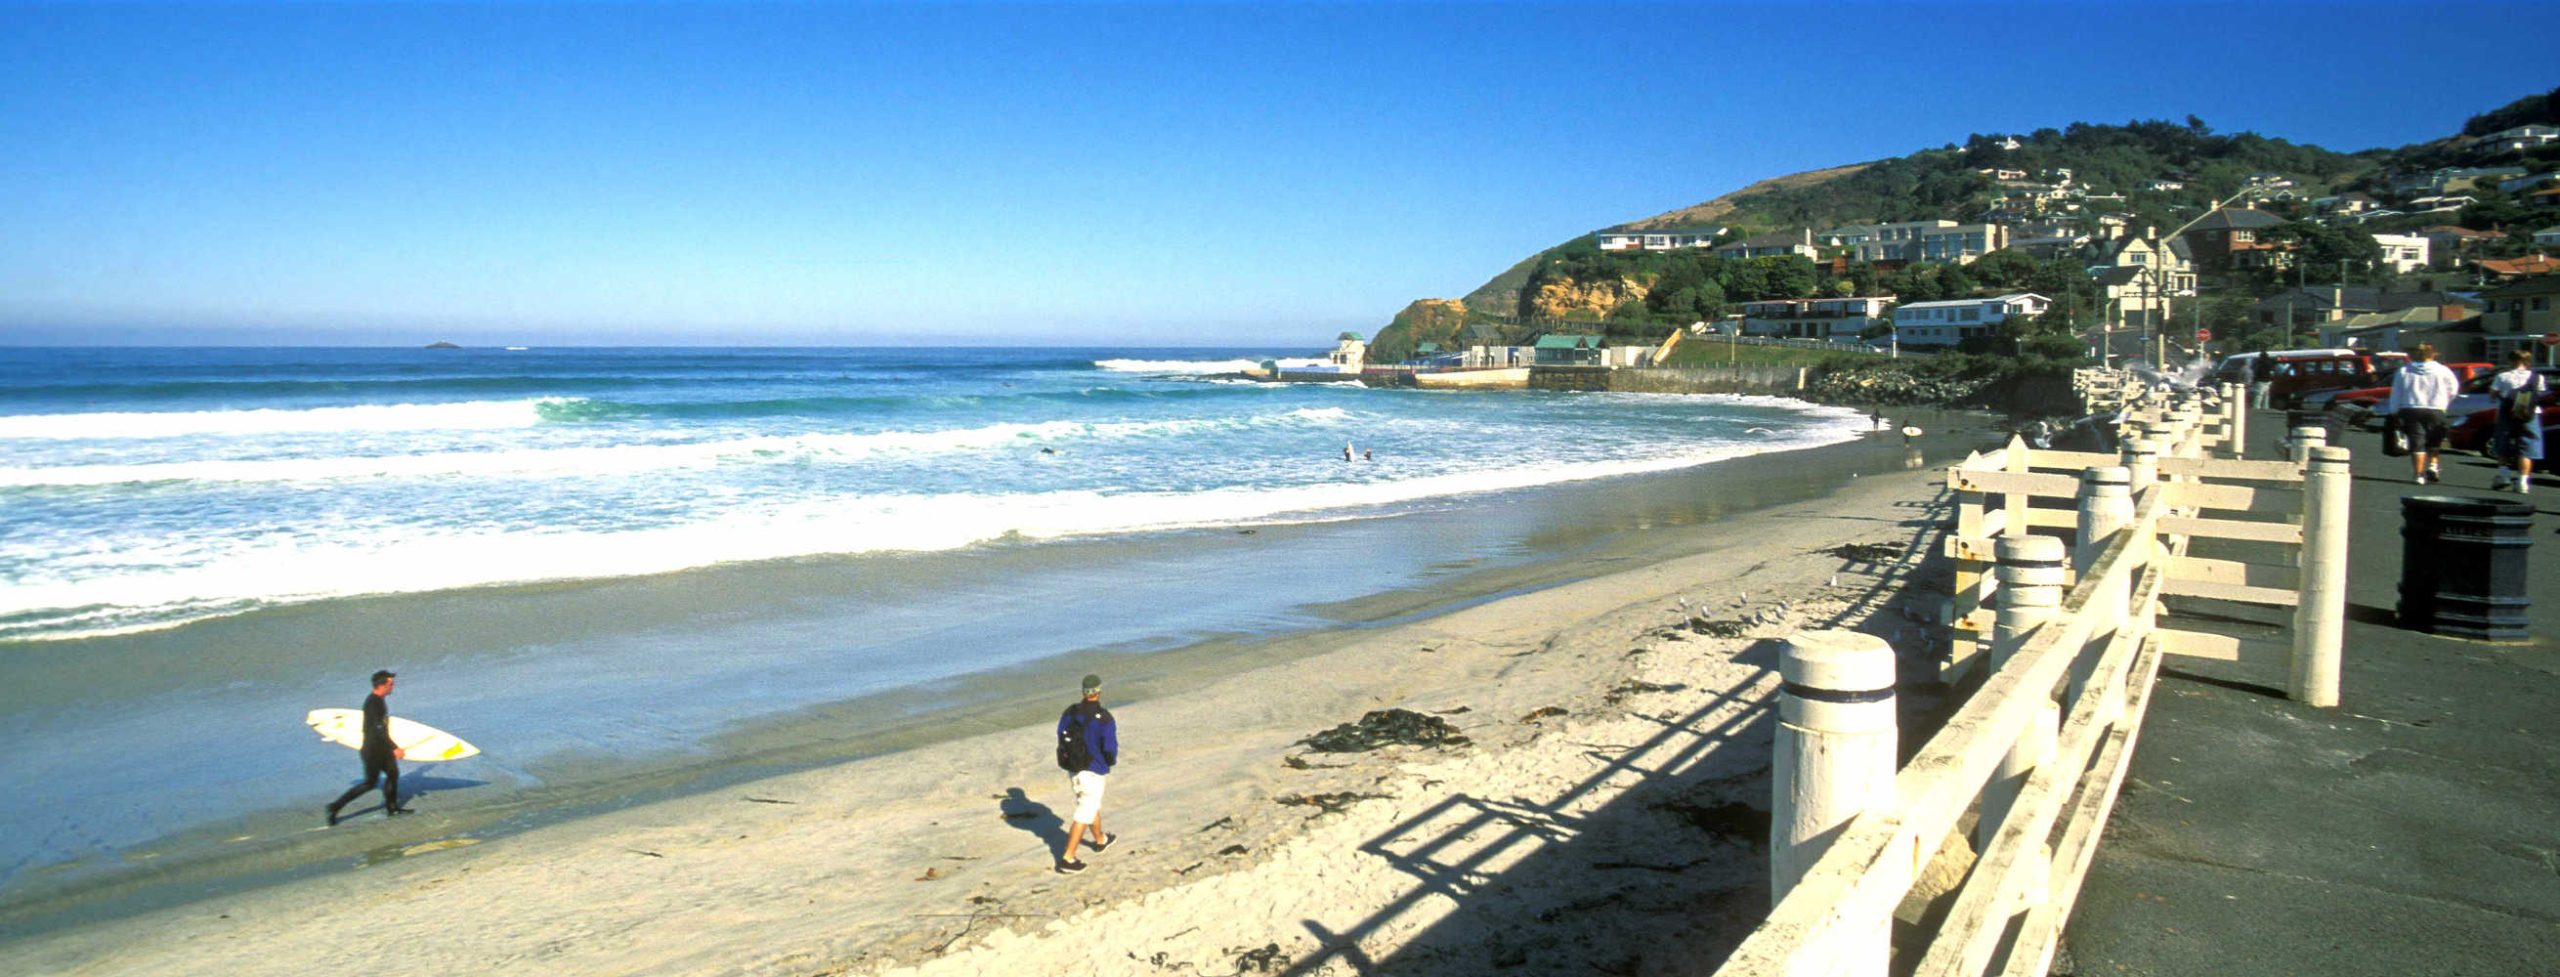 The popular surf beach and Esplanade at St Clair in the south of the Dunedin capital city of Otago South Island New Zealand